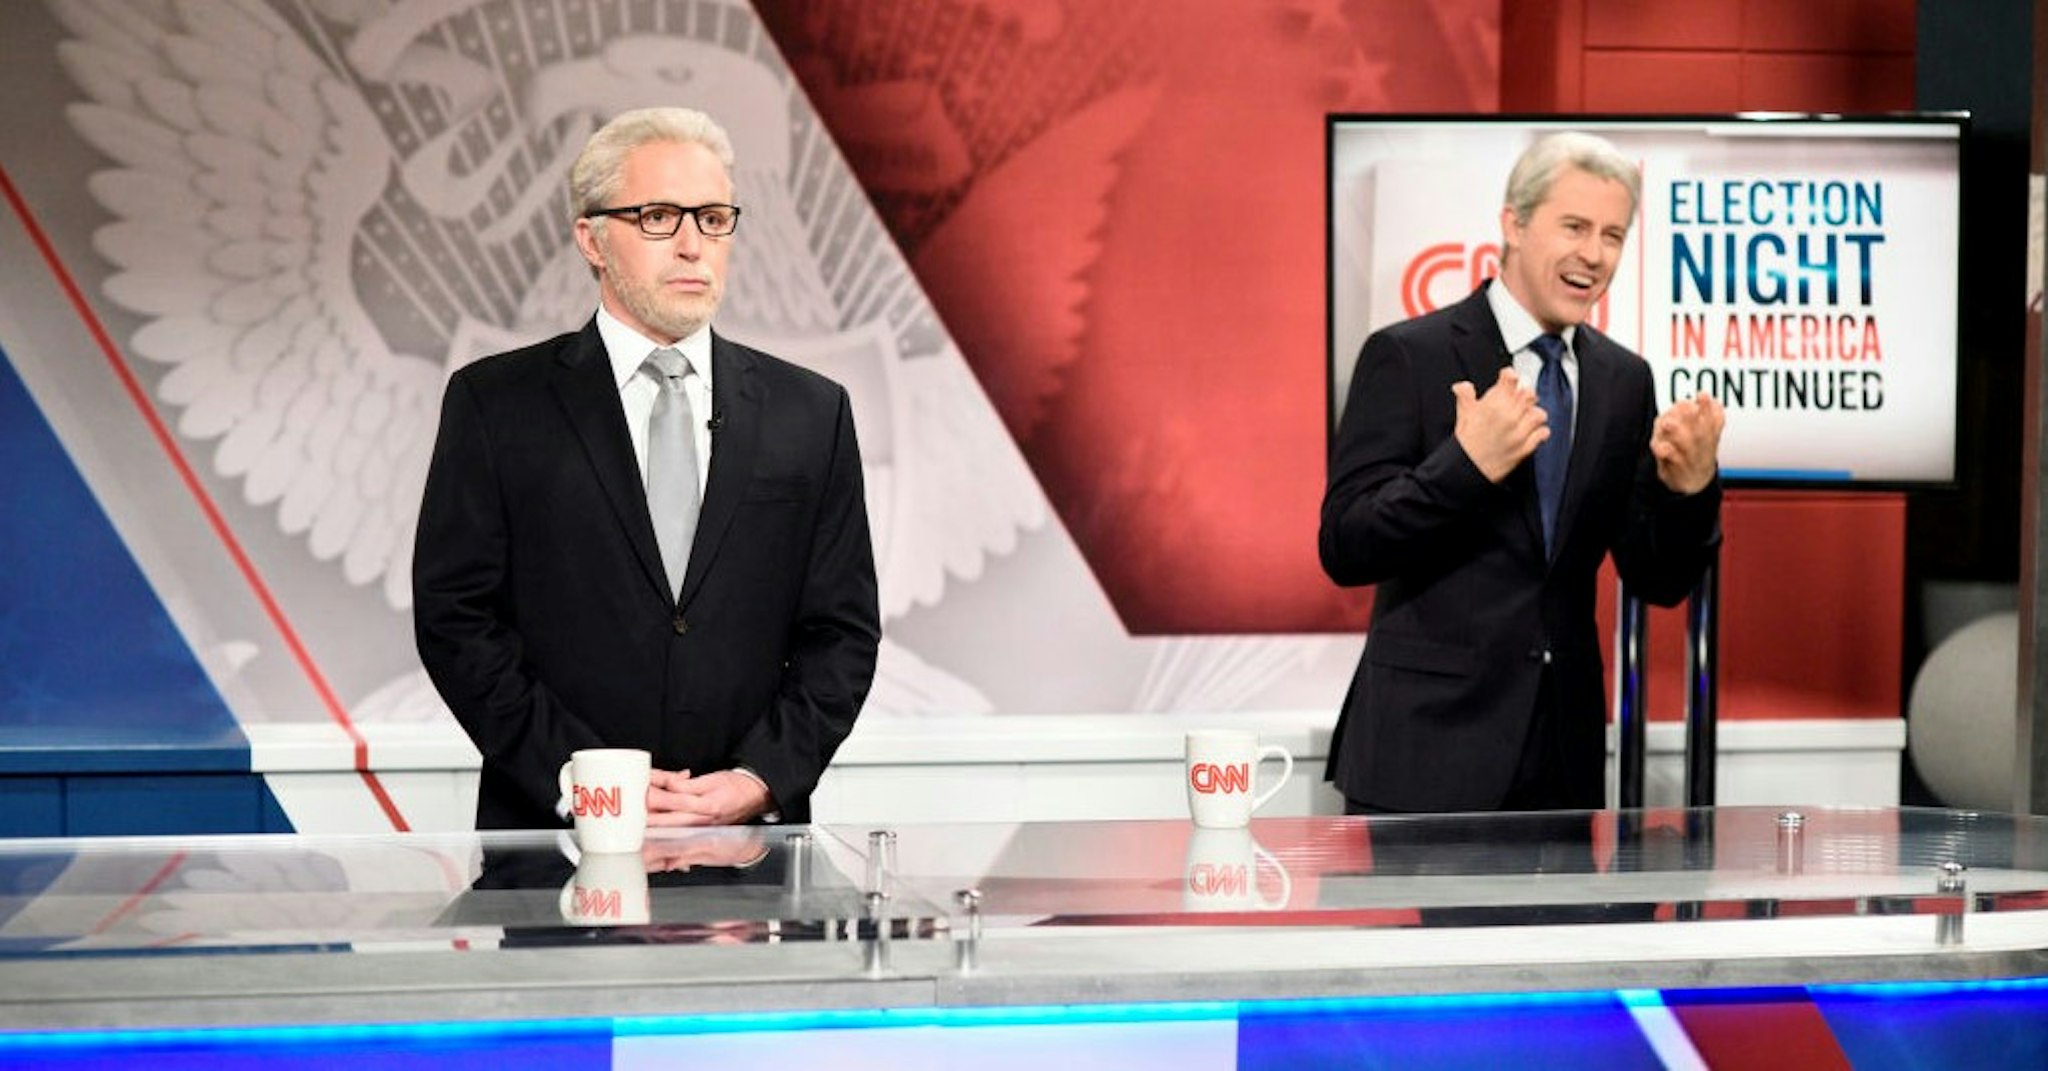 SATURDAY NIGHT LIVE -- "Dave Chappelle" Episode 1791 -- Pictured: (l-r) Beck Bennett as Wolf Blitzer and Alex Moffat as John King during the "Biden Victory" Cold Open on Saturday, November 7, 2020 -- (Photo By: